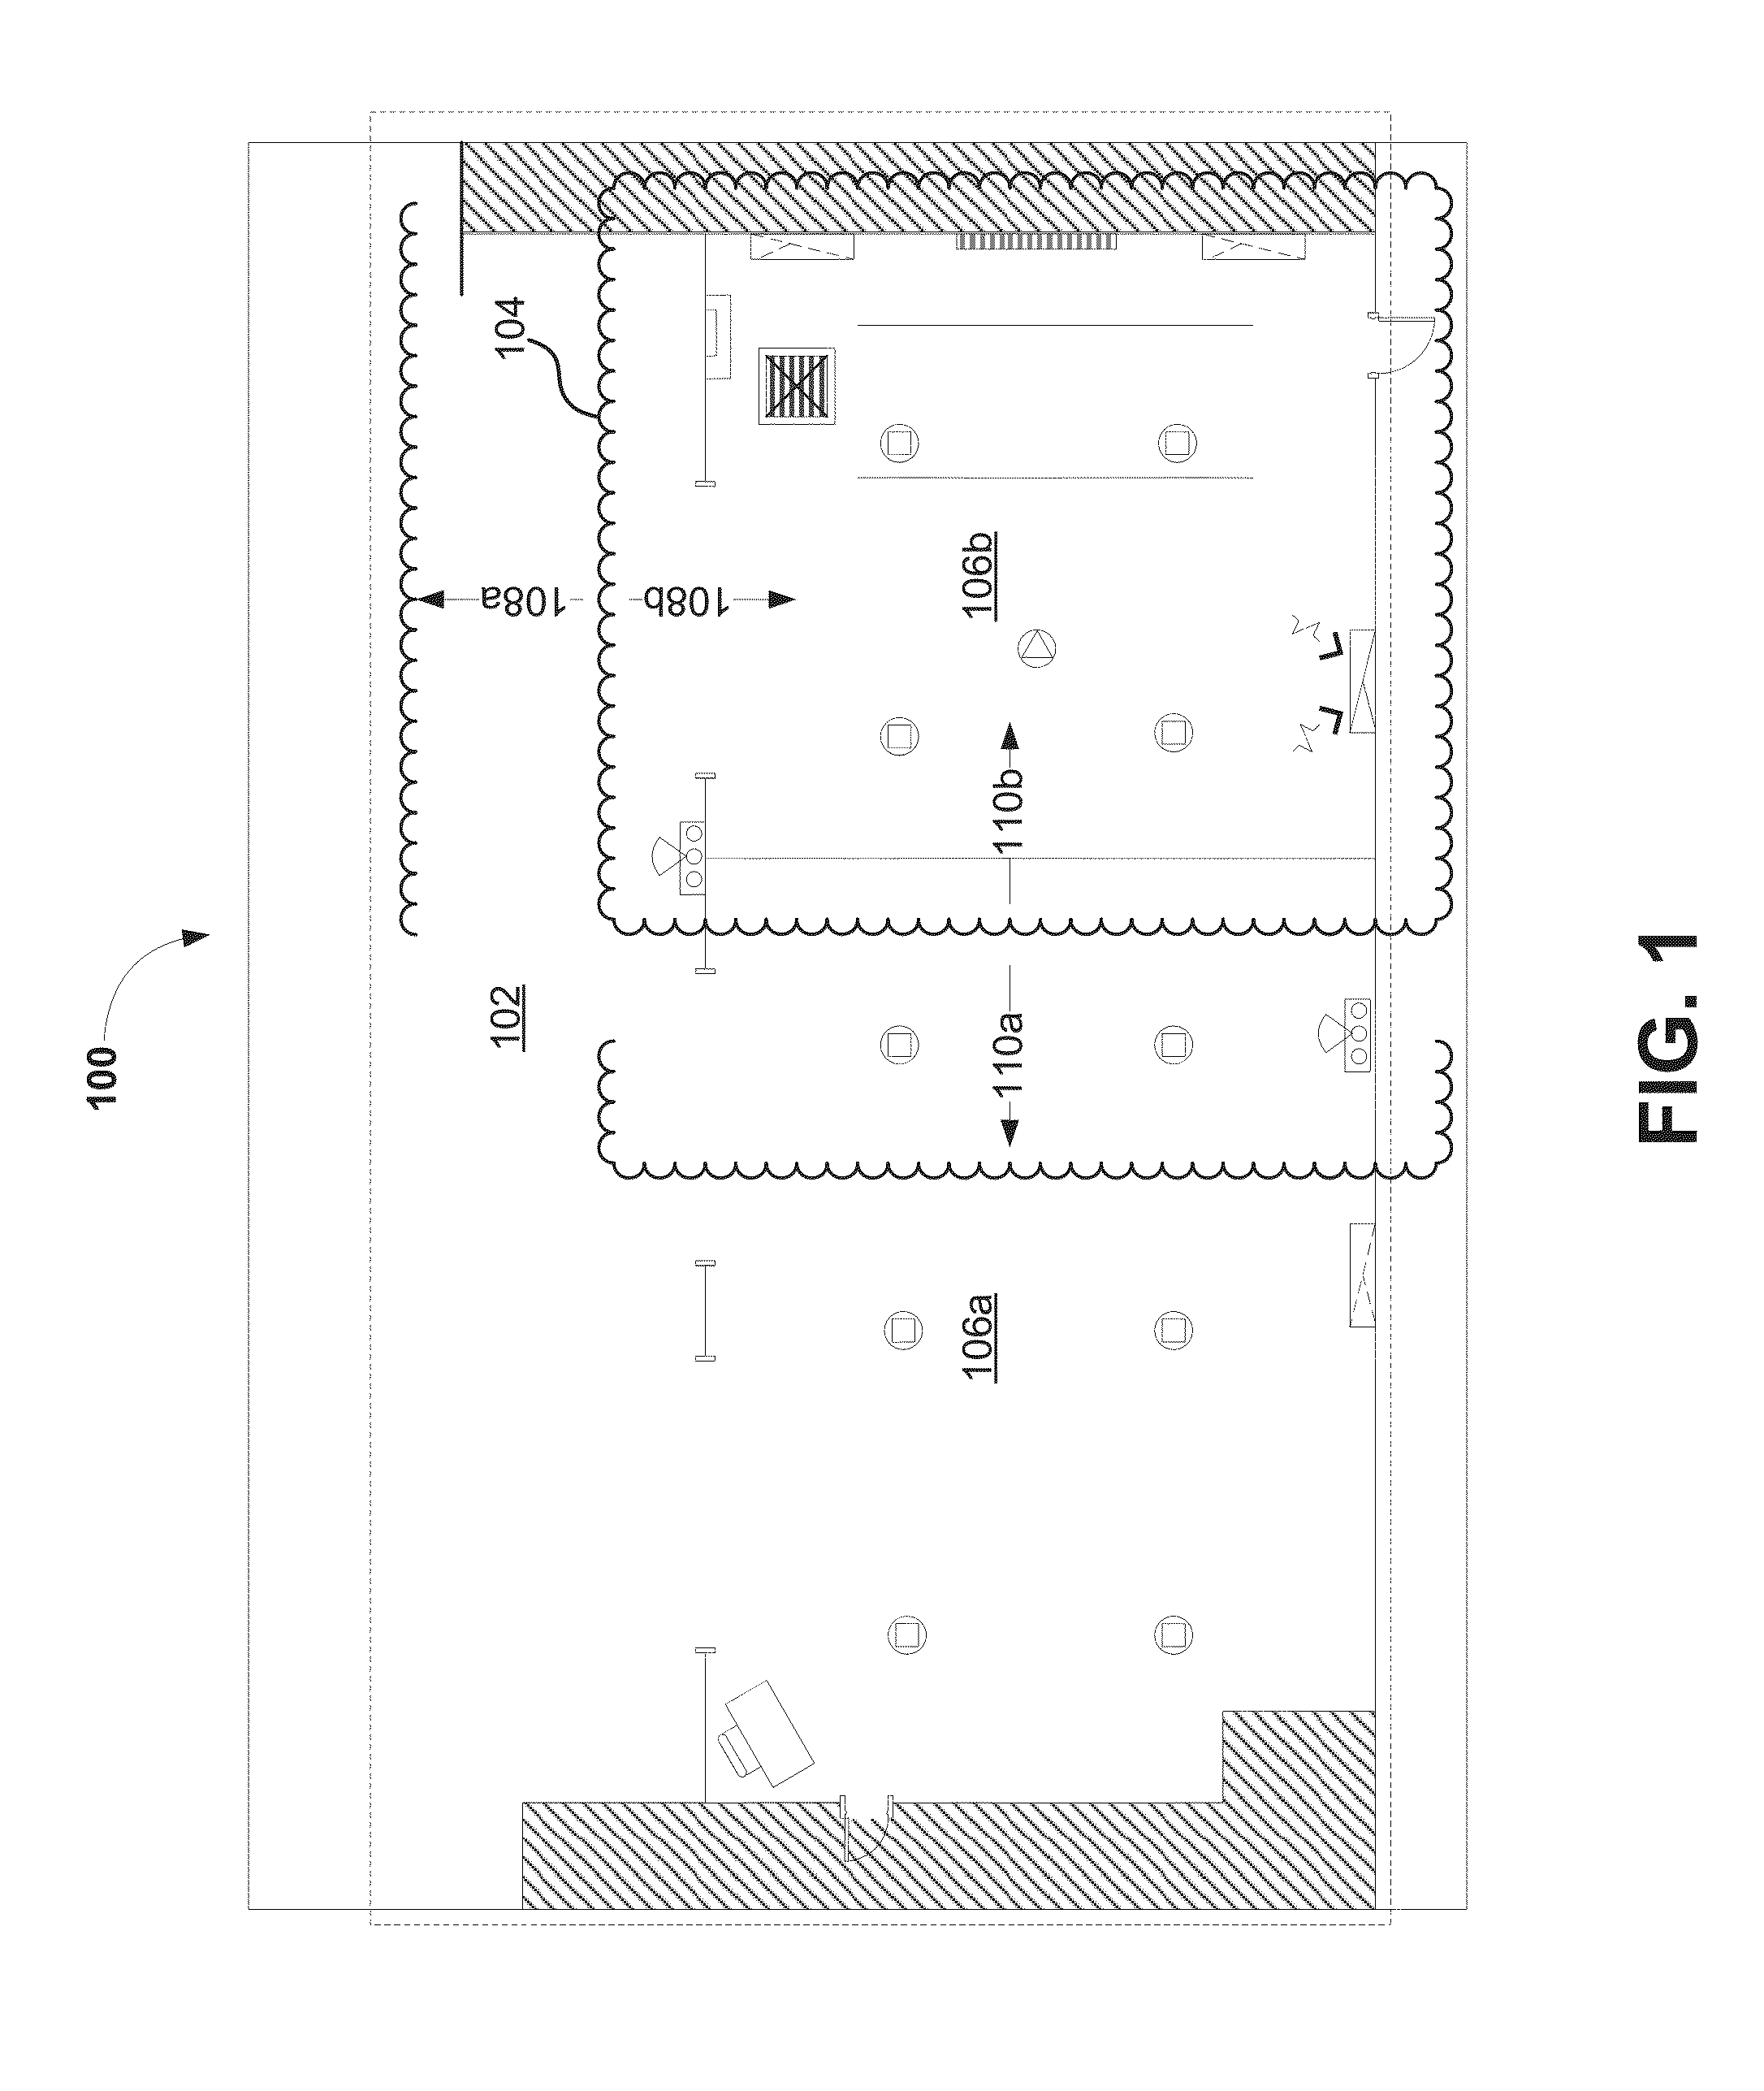 Natural gas vehicle maintenance separation and containment system